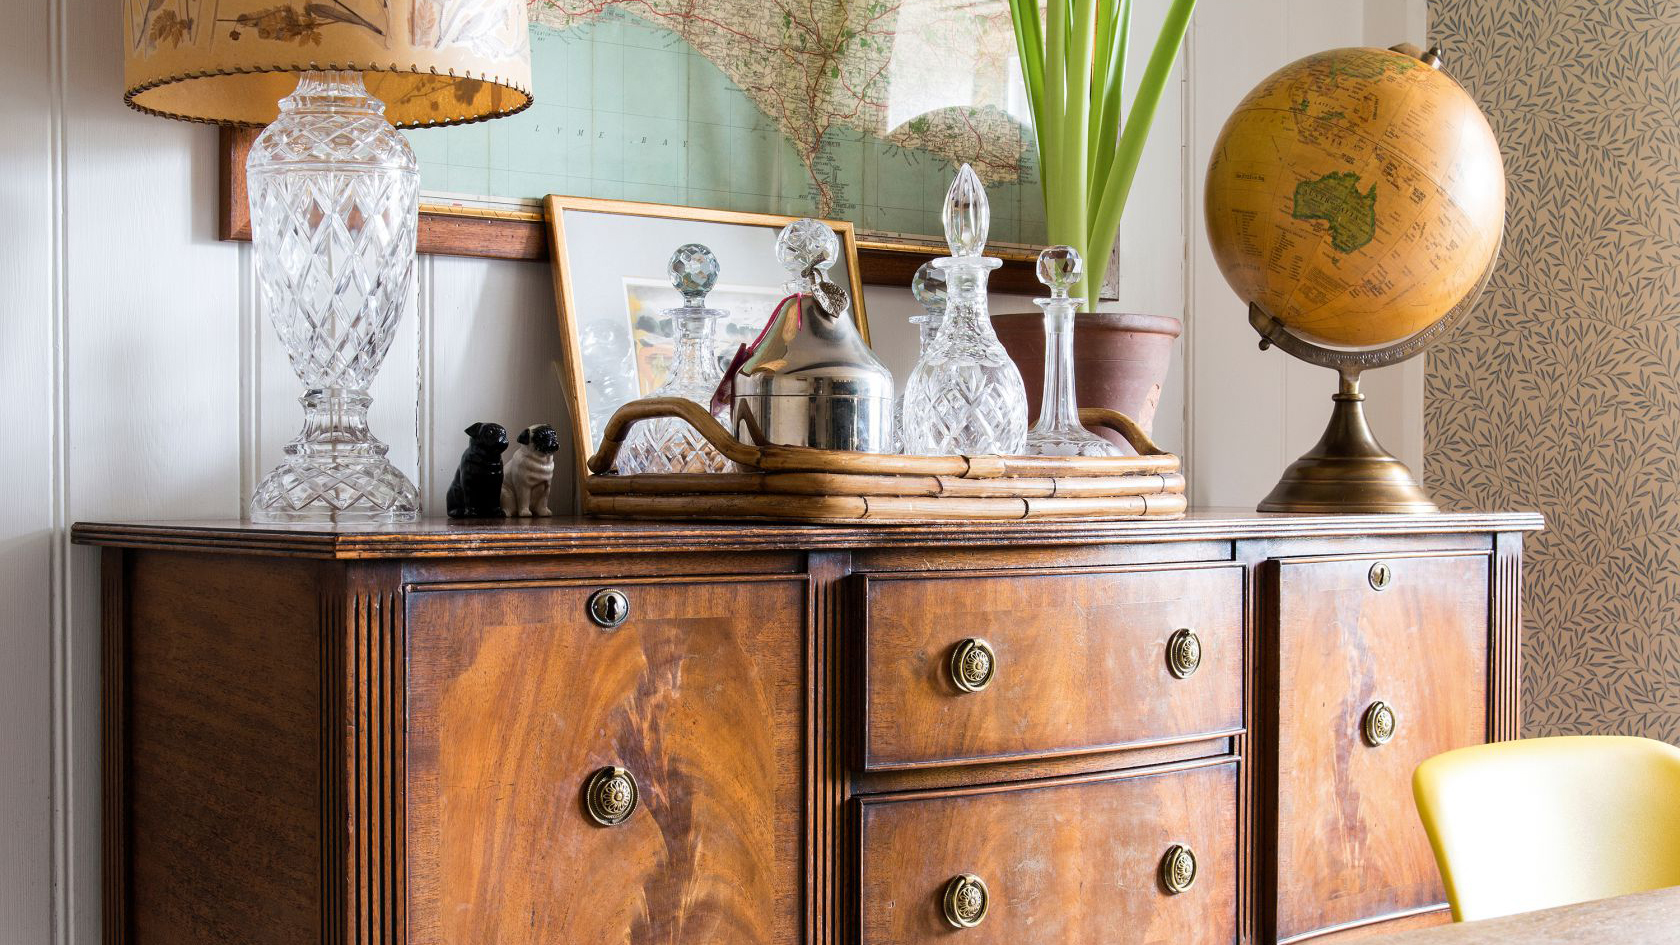 How to restore wood furniture: clean, repair and refinish  Real Homes